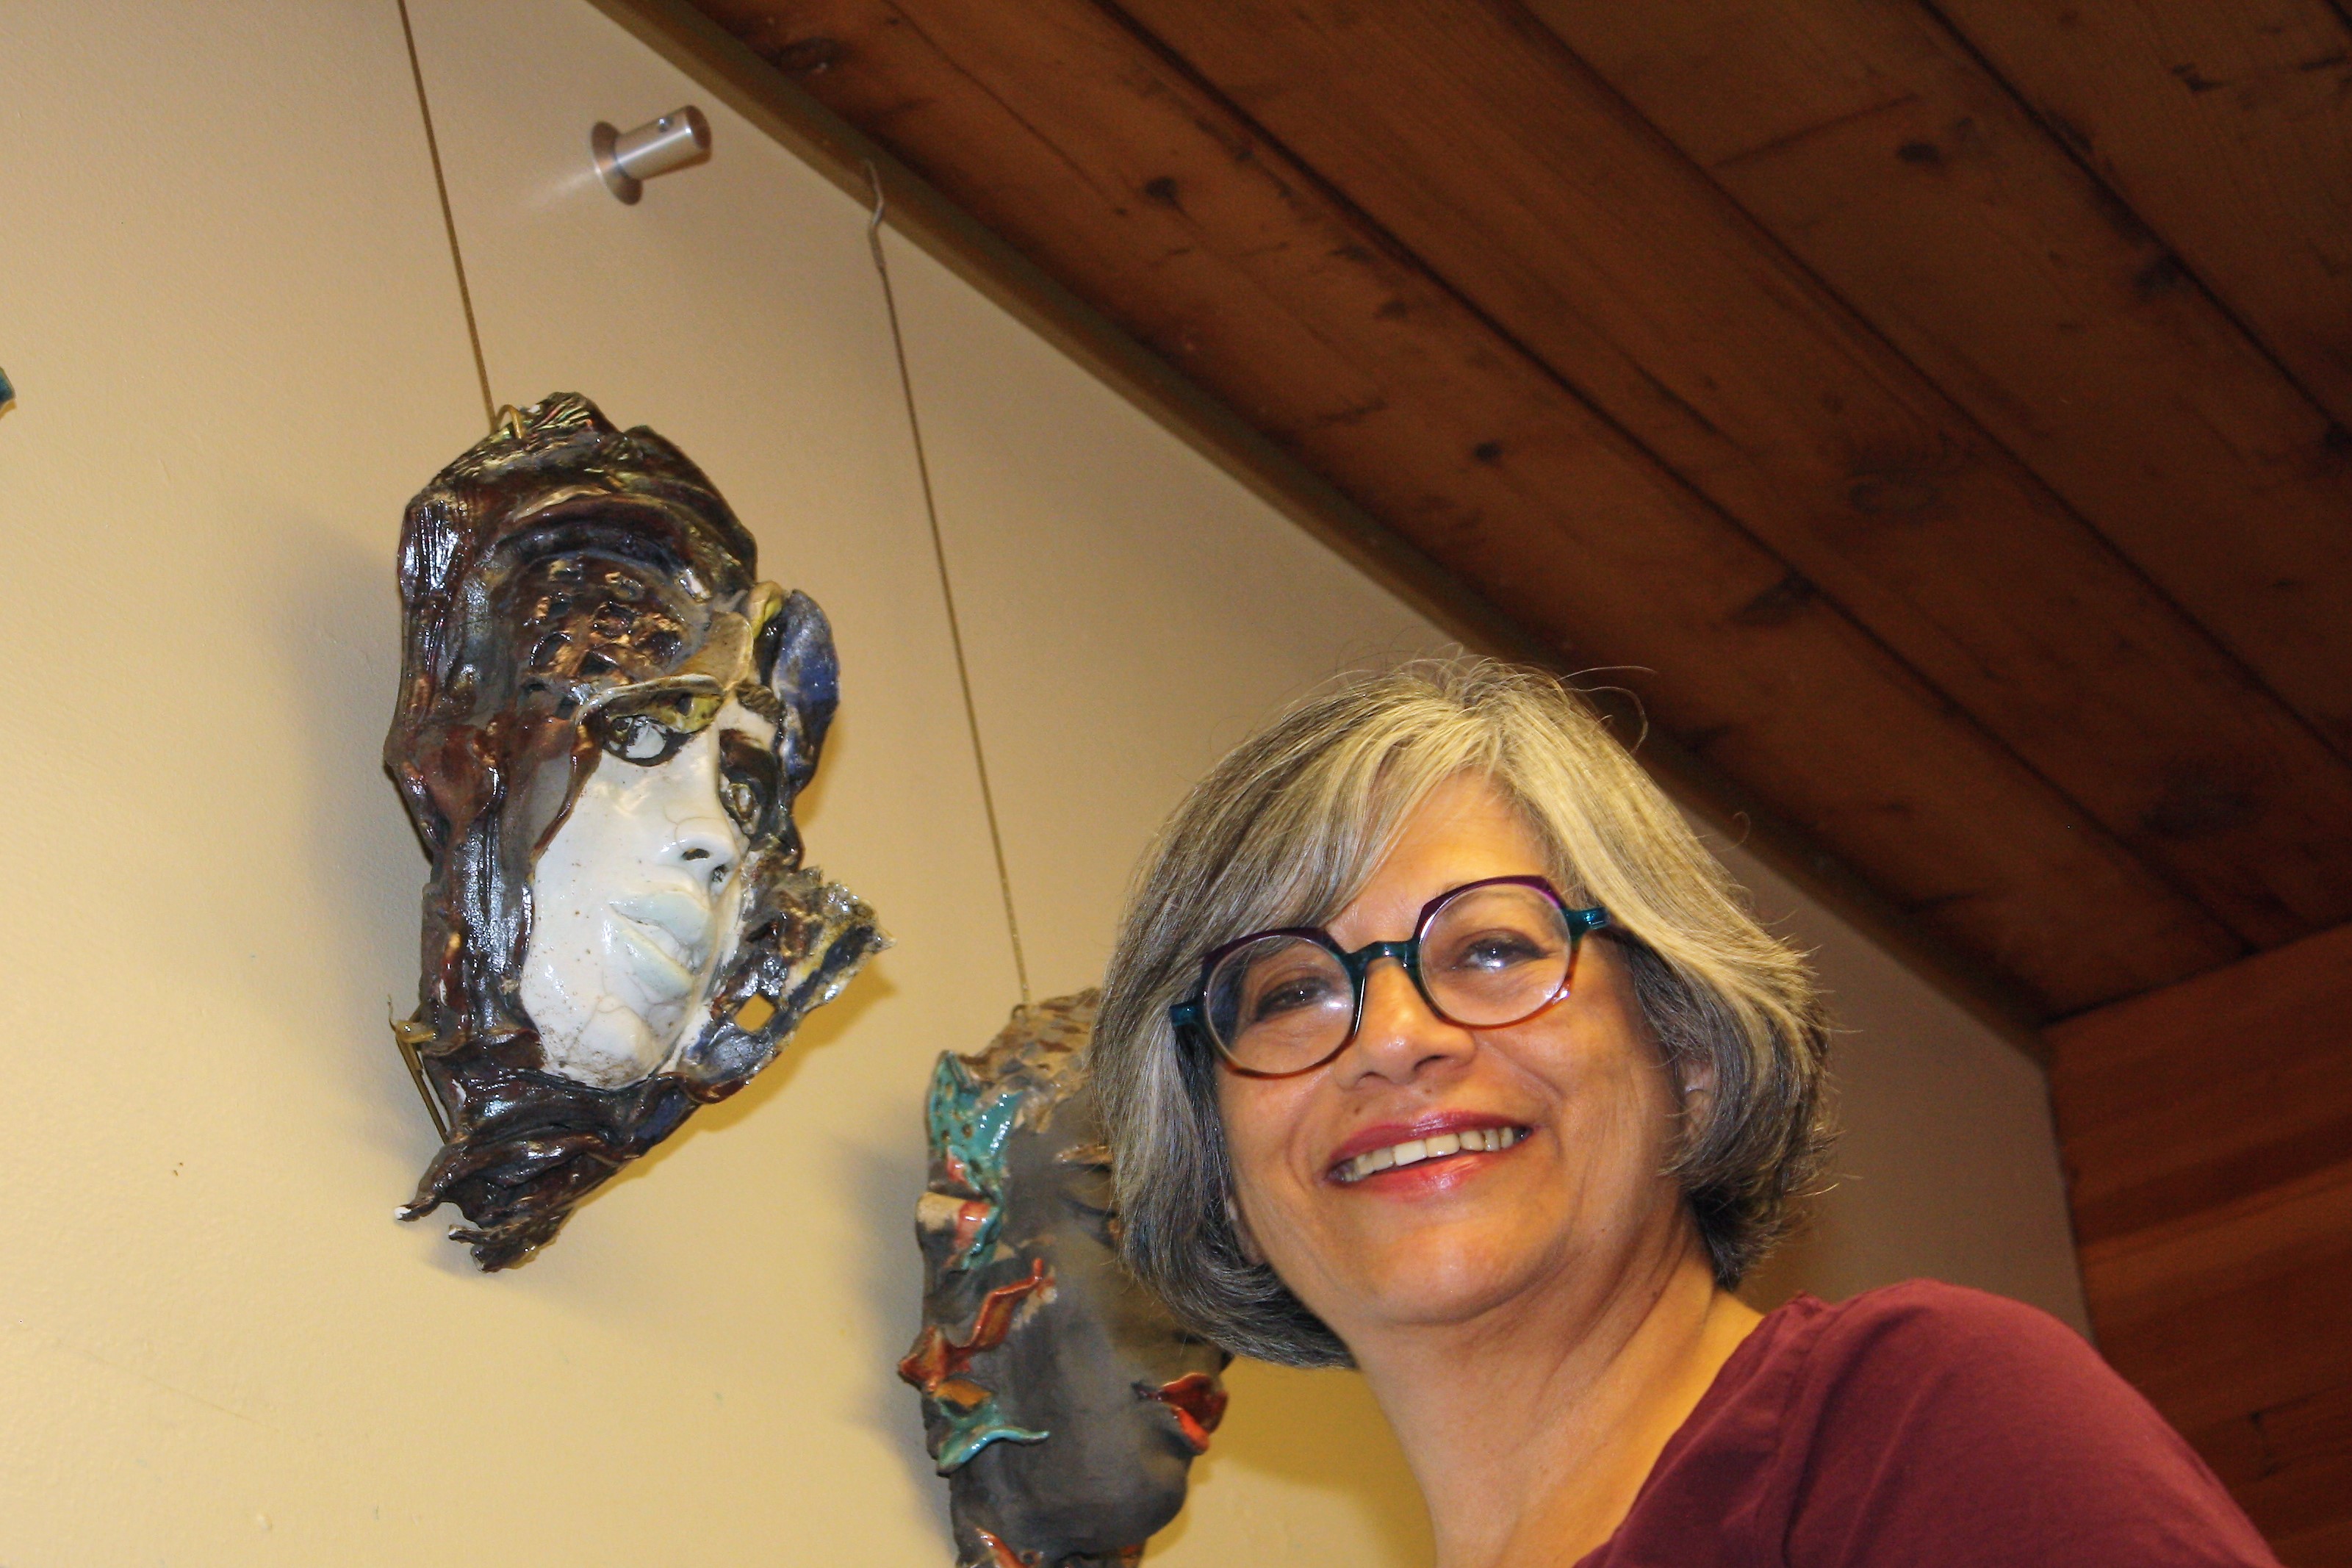 Shaheen Shariff with two artistic masks she made